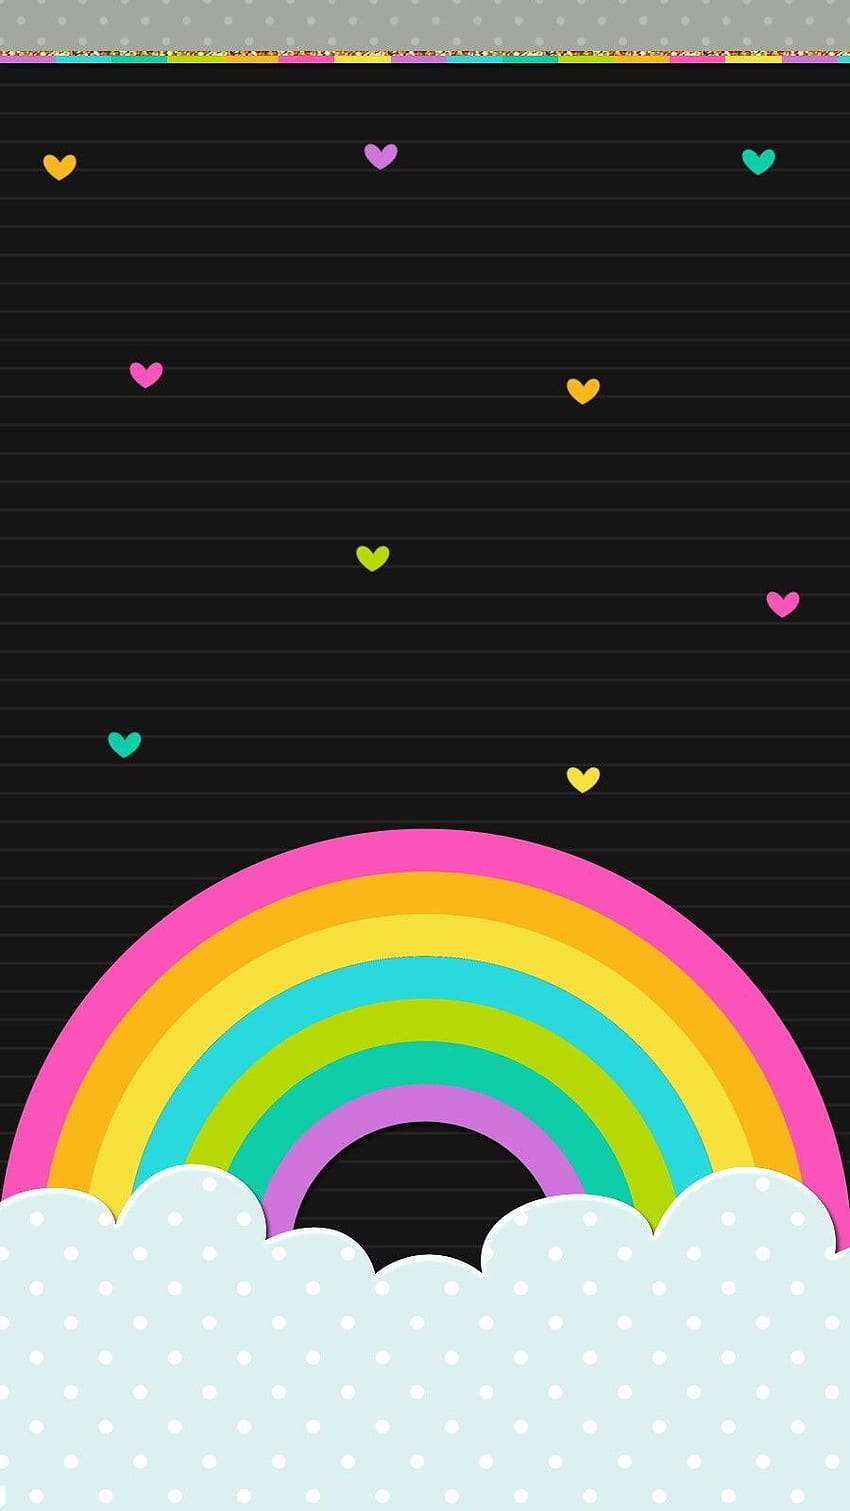 300+] Rainbow Background s | Wallpapers.com